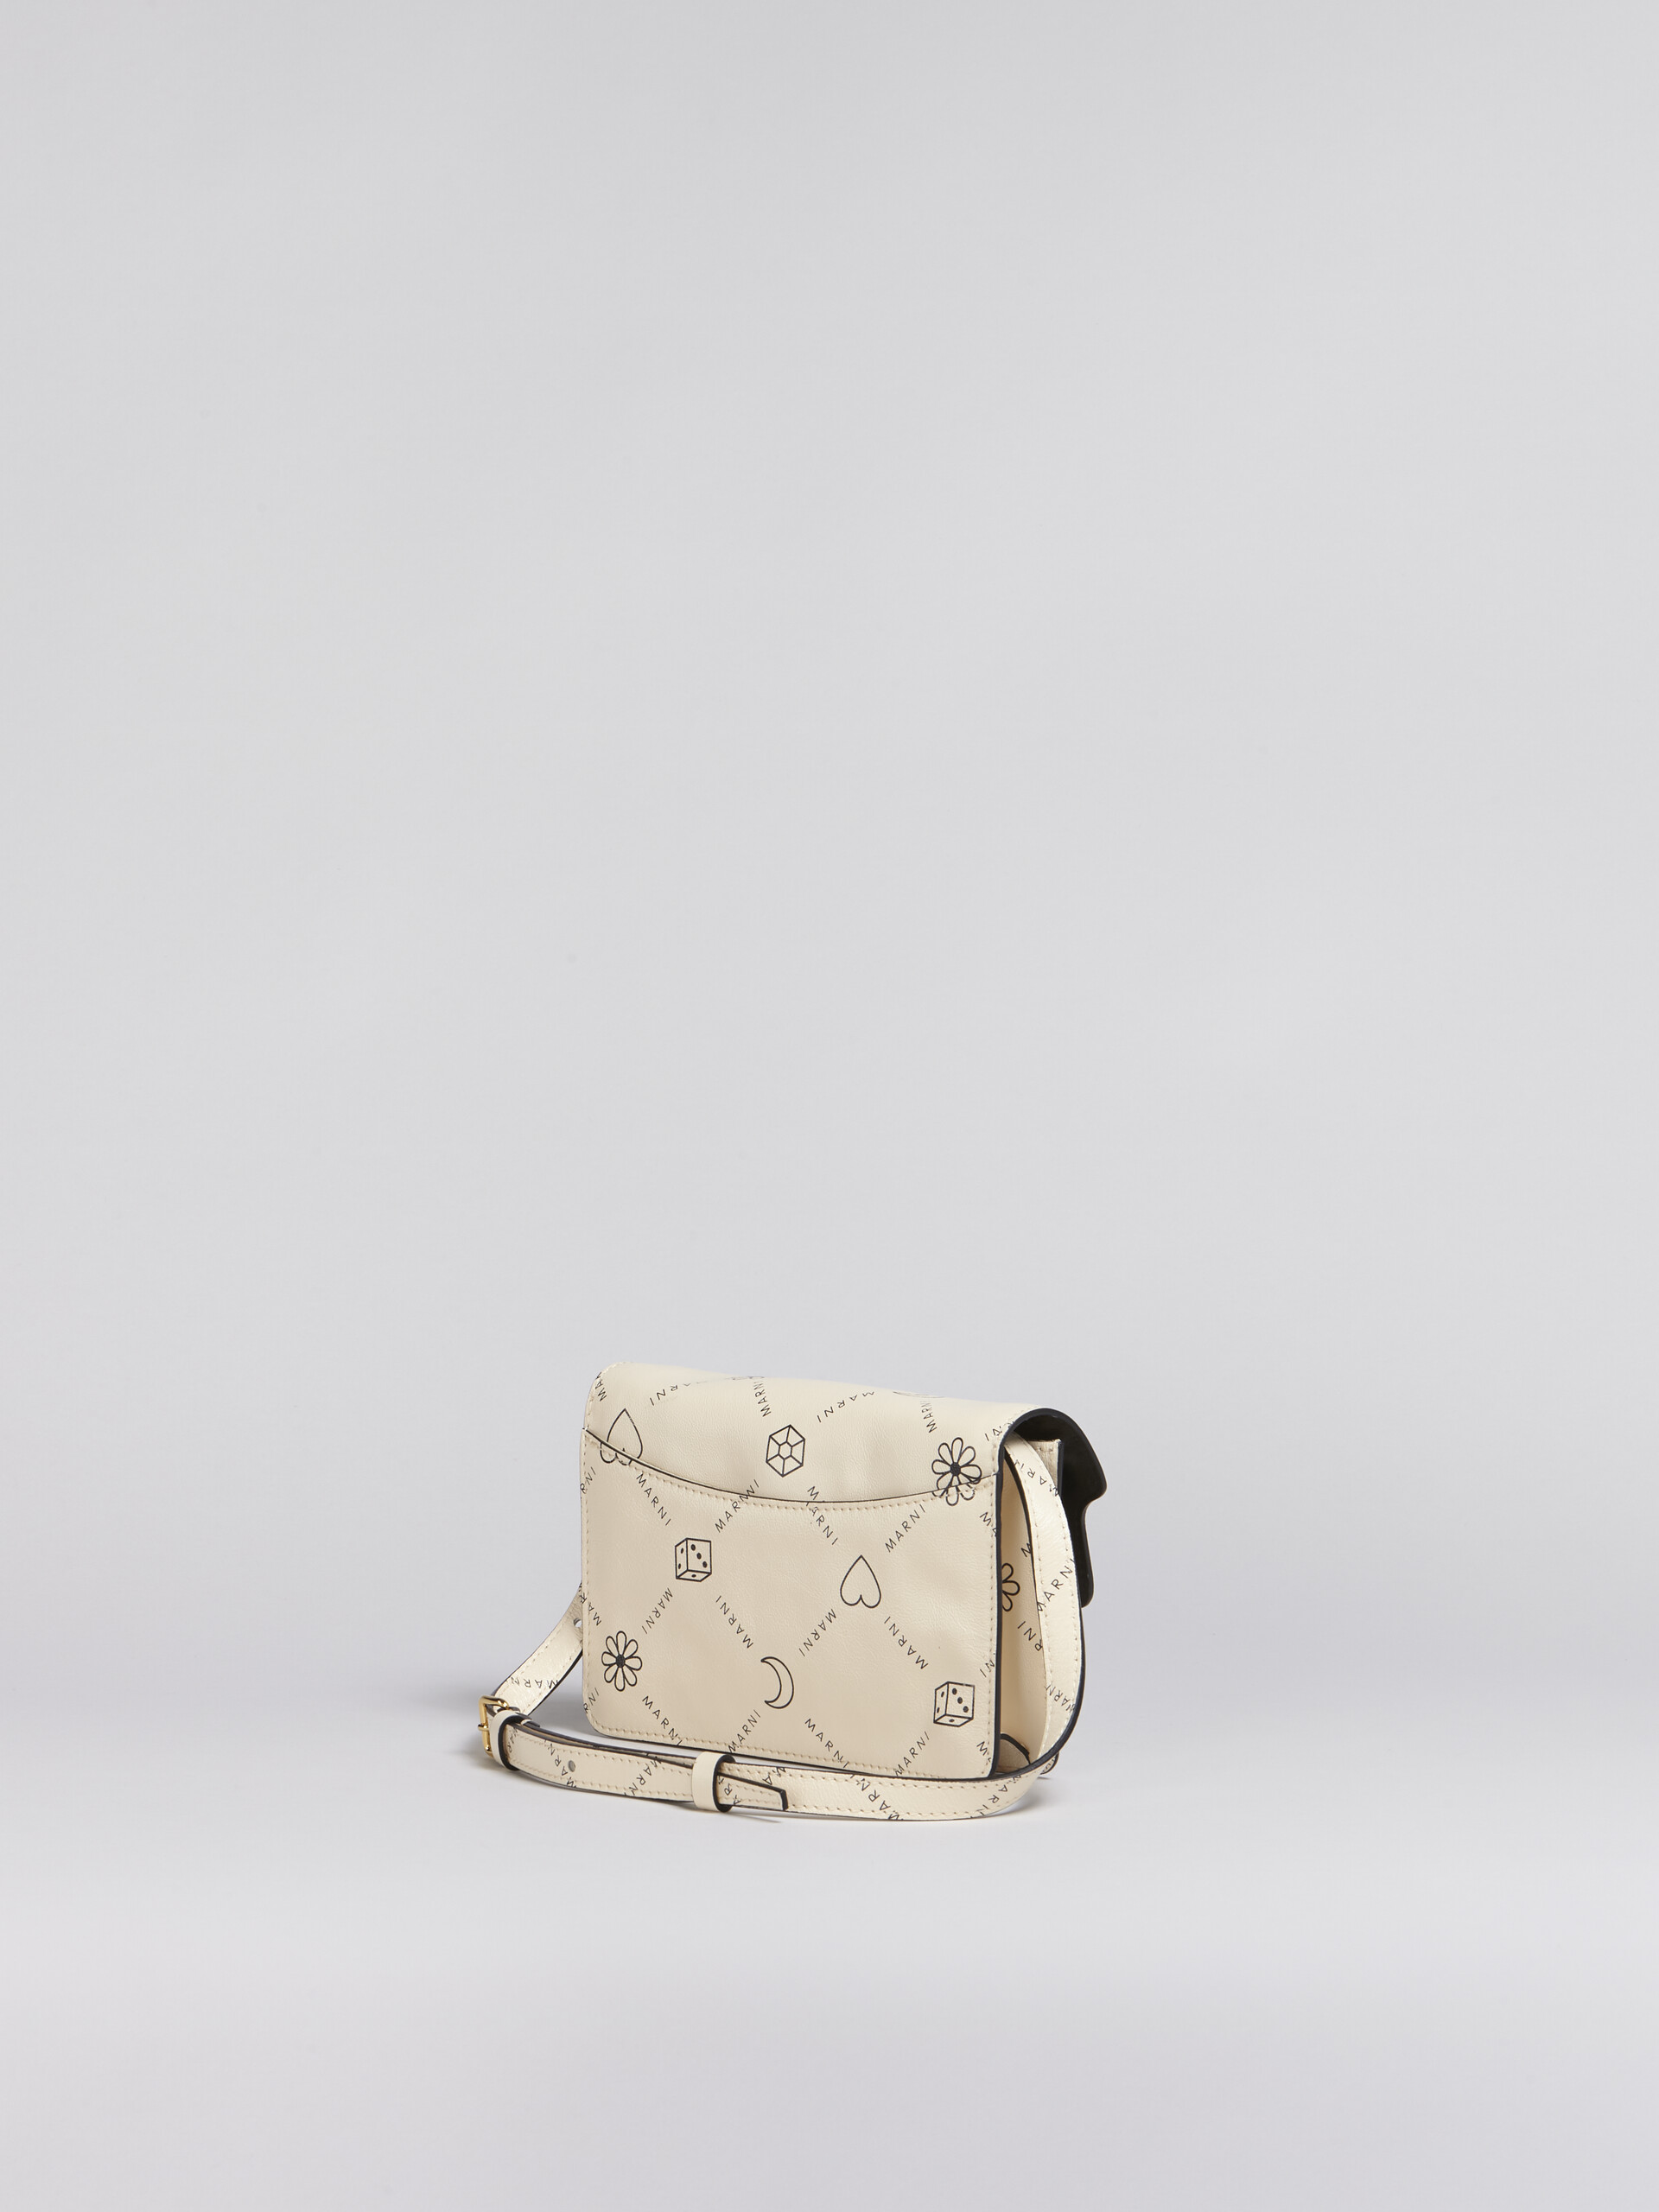 TRUNK SOFT bumbag in white Marnigram print leather - Belt Bags - Image 2